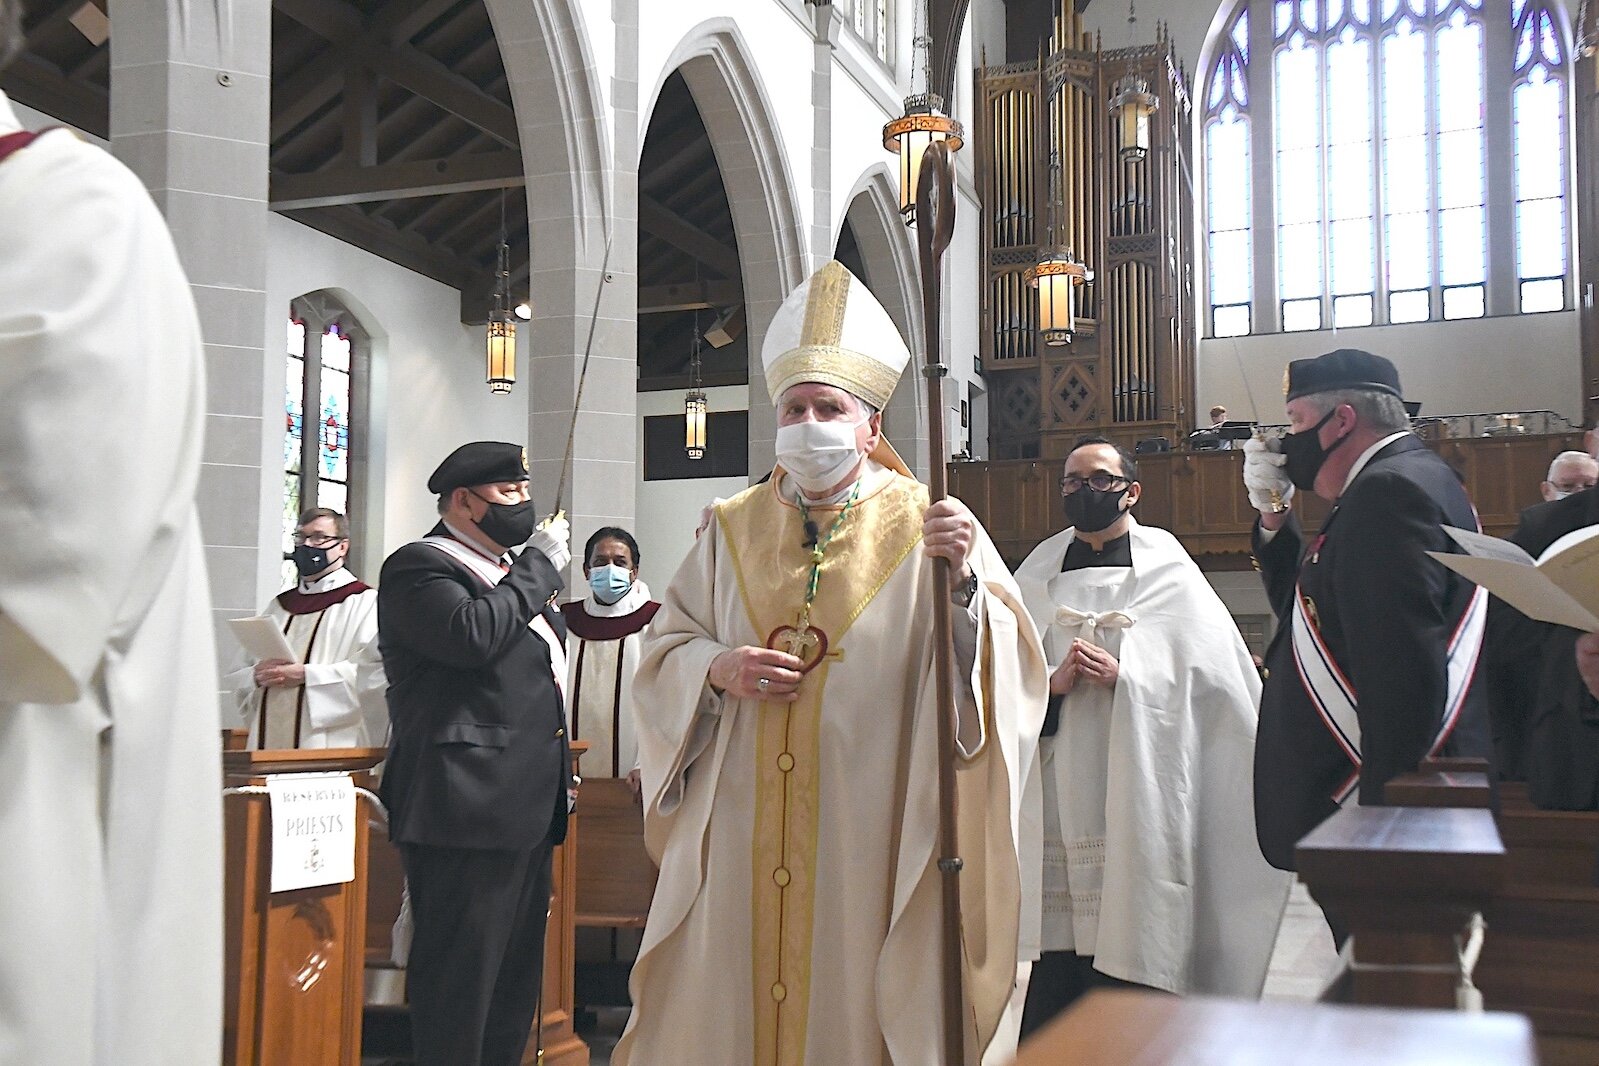 Bishop Paul Bradley of the Catholic Diocese of Kalamazoo, wearing protective gear, processes into St. Augustine Cathedral last year.